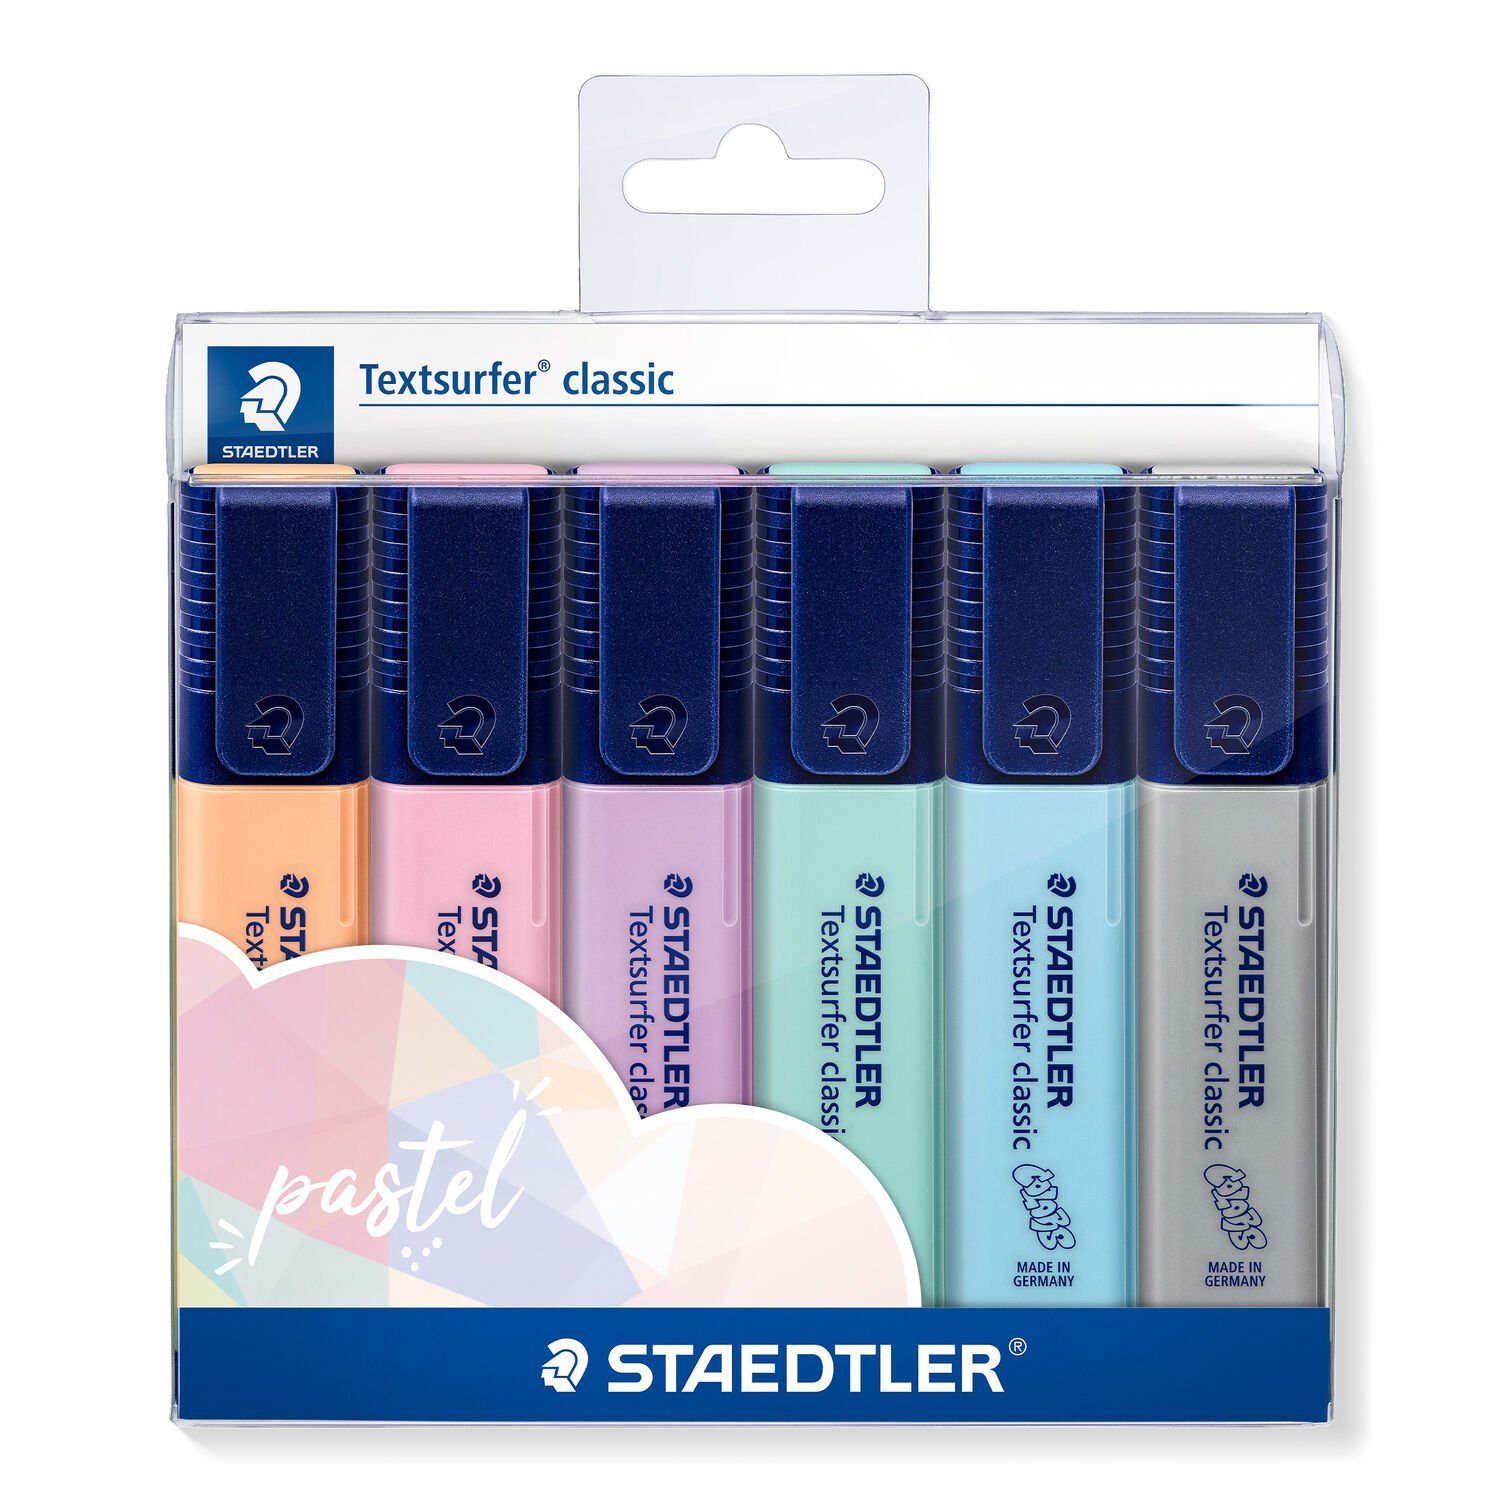 Wallet containing 6 Textsurfer classic in assorted colours - Pastel line